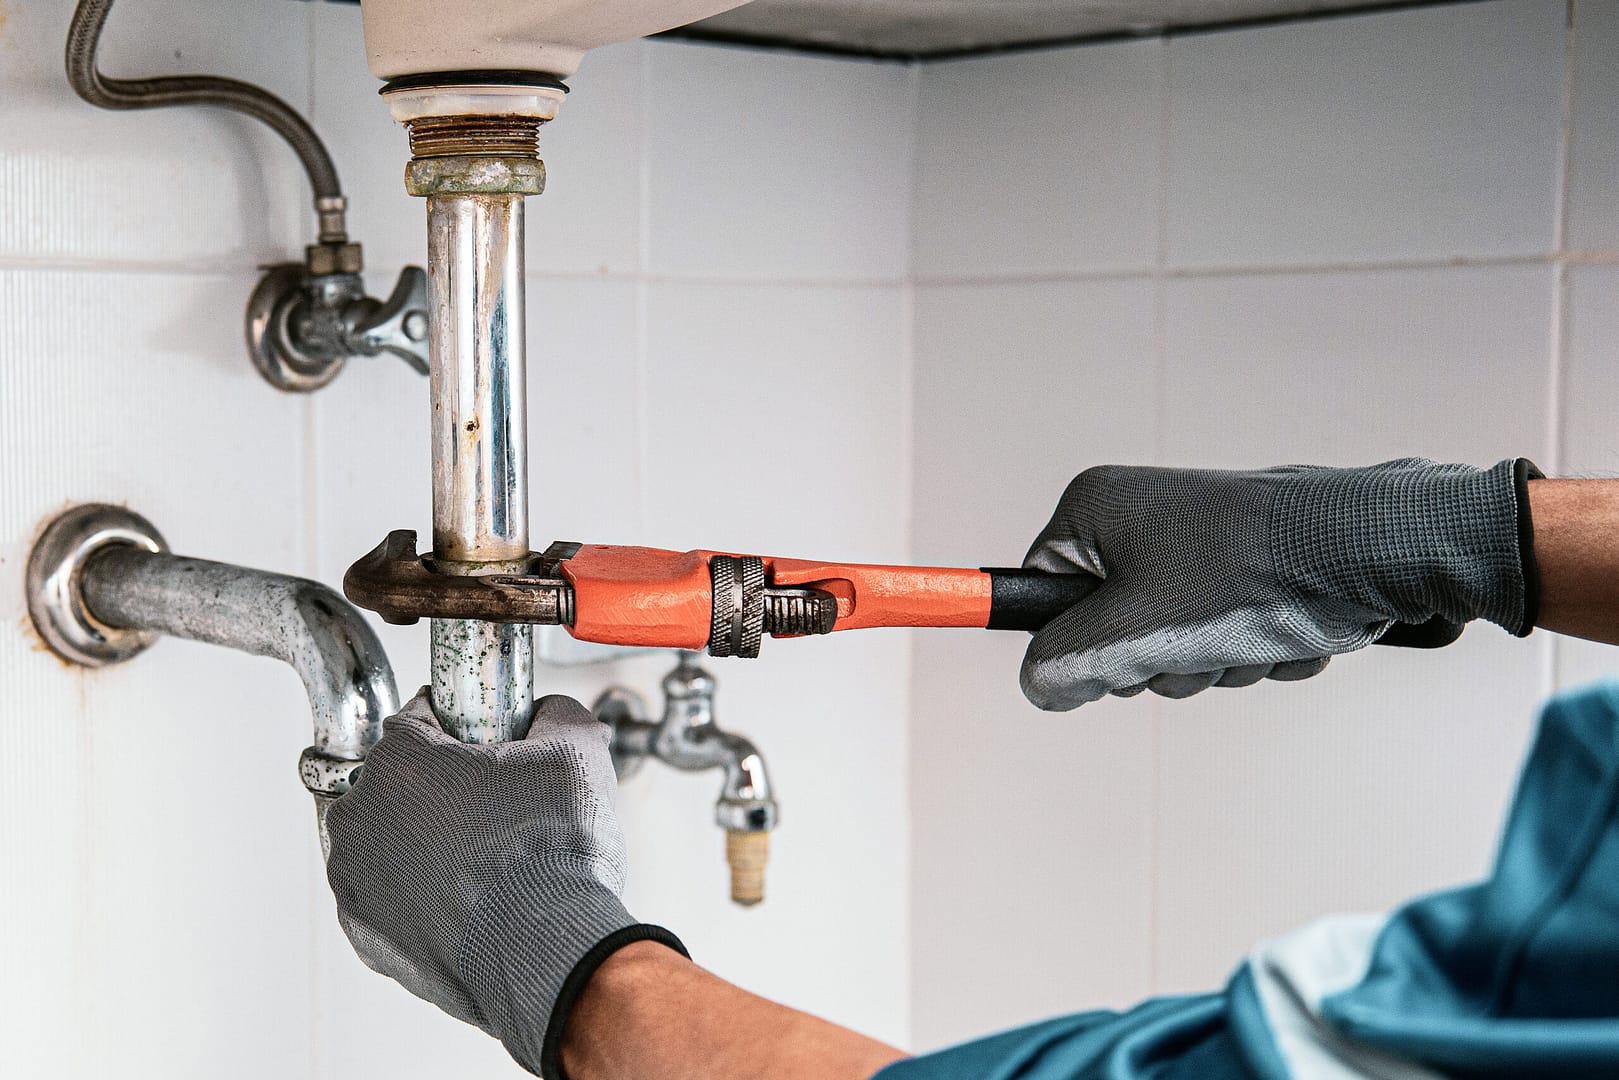 A skilled technician plumber uses a wrench to repair a water pipe under the sink.